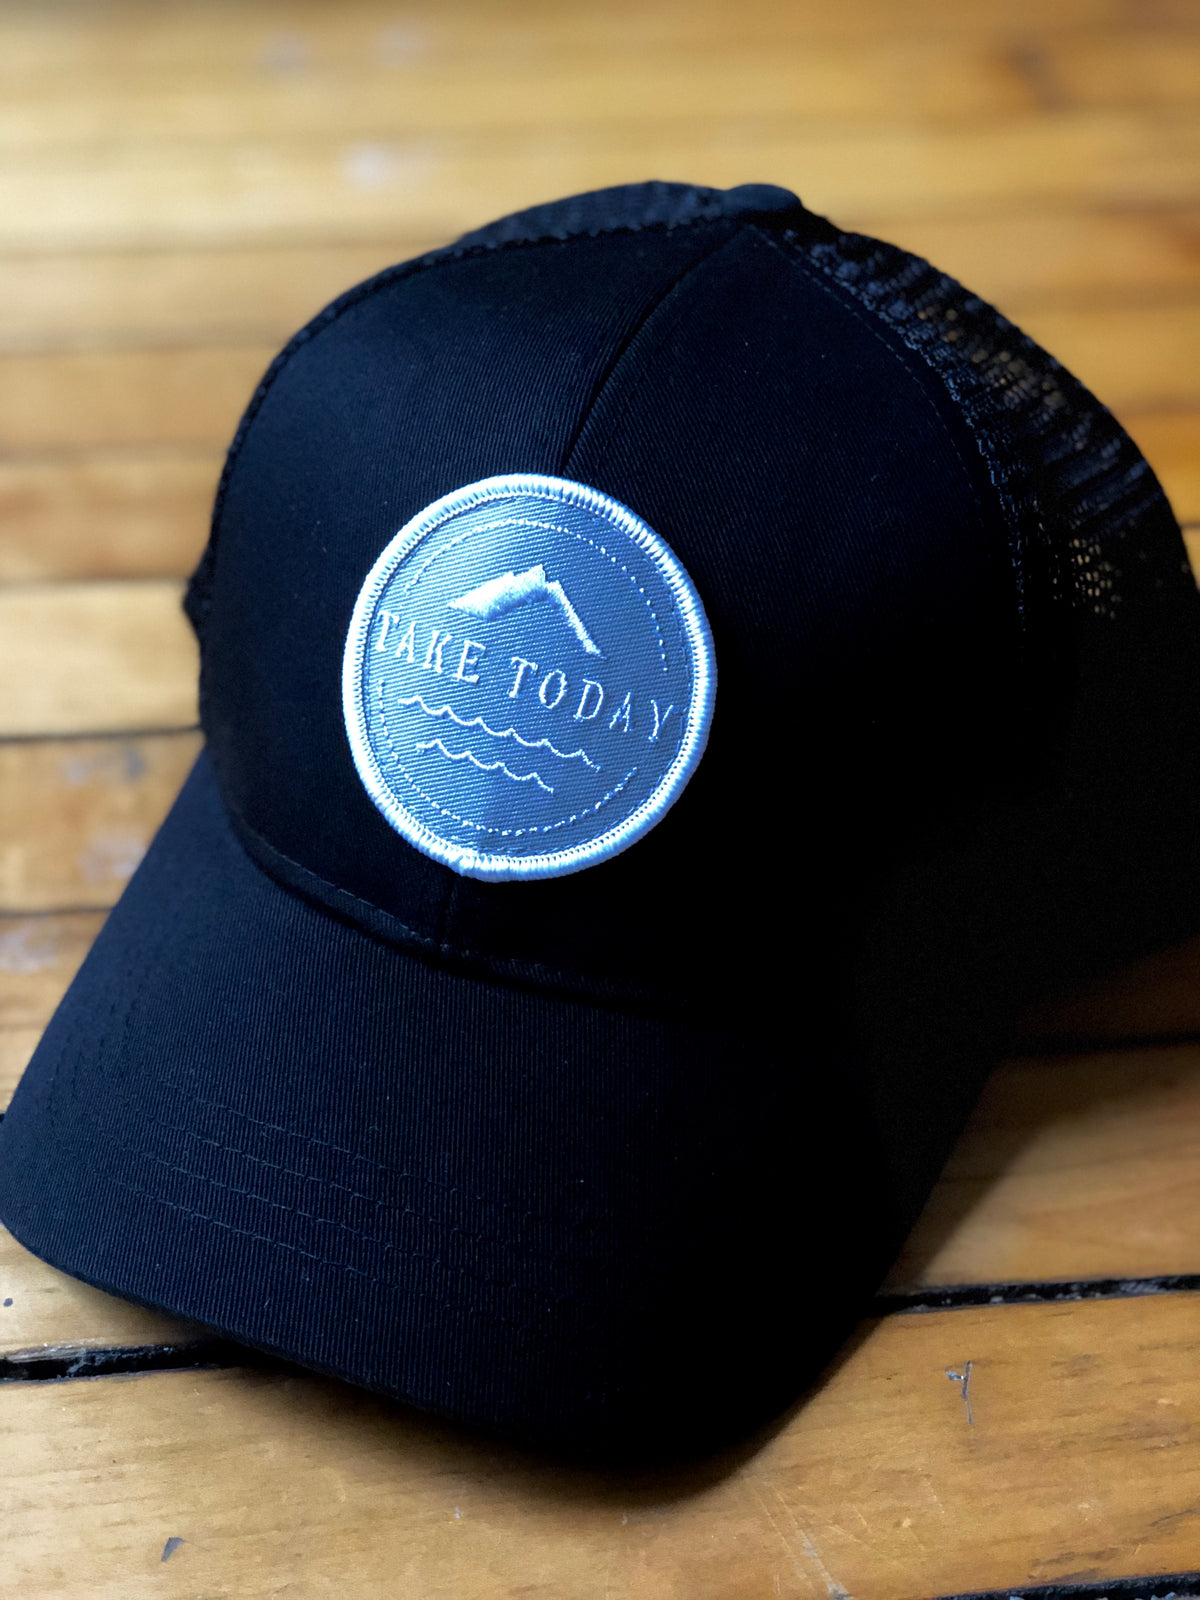 "uptown" trucker hat in late night - Take Today Community